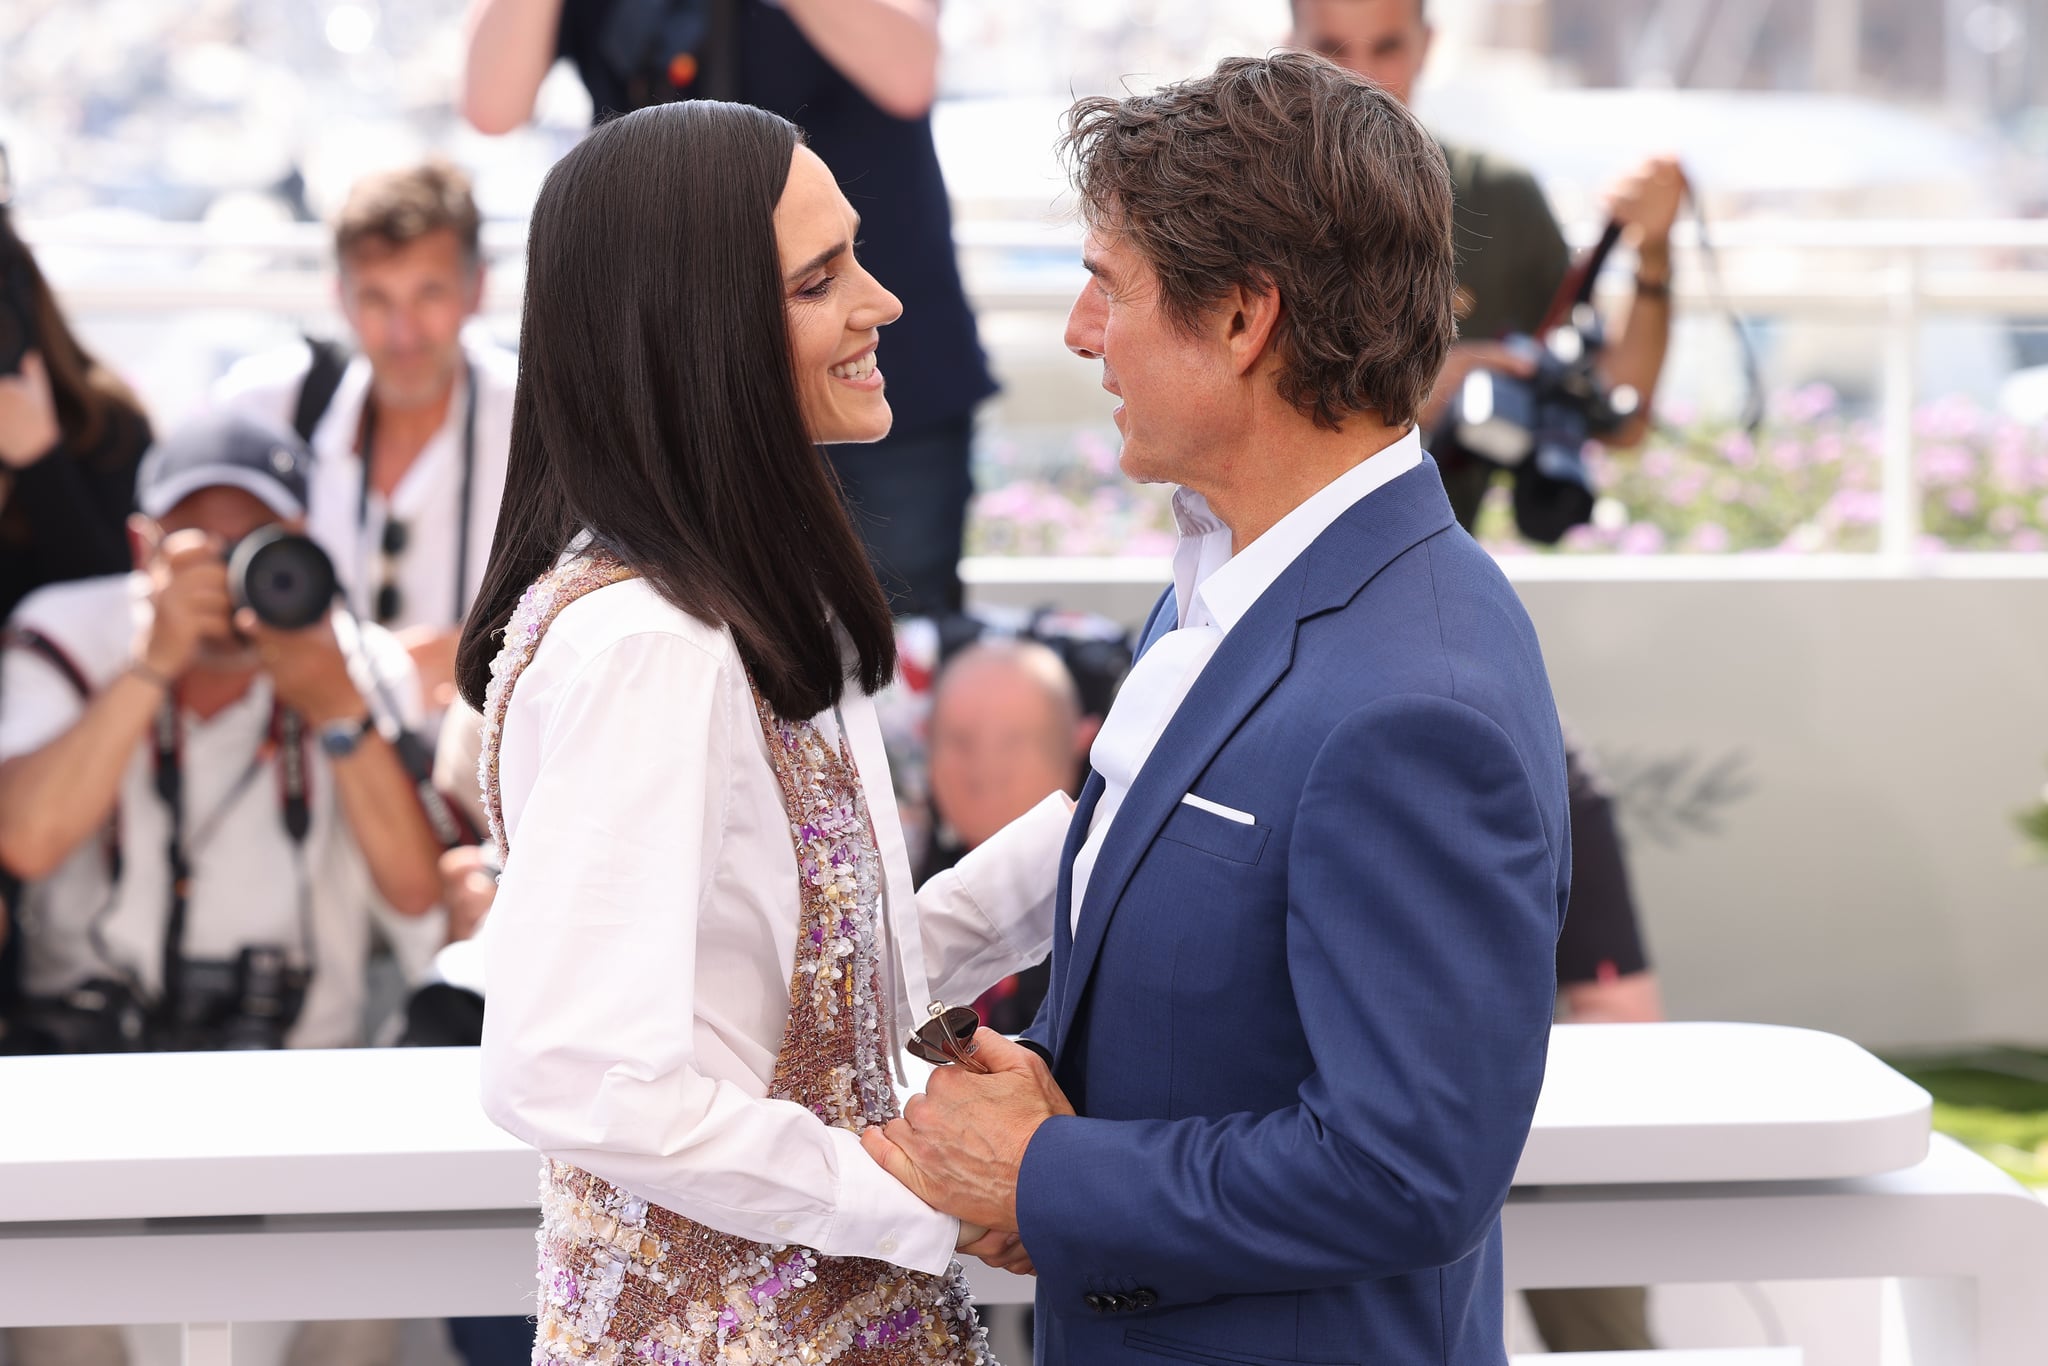 Cannes Film Festival 2022: Tom Cruise and Jennifer Connelly at the